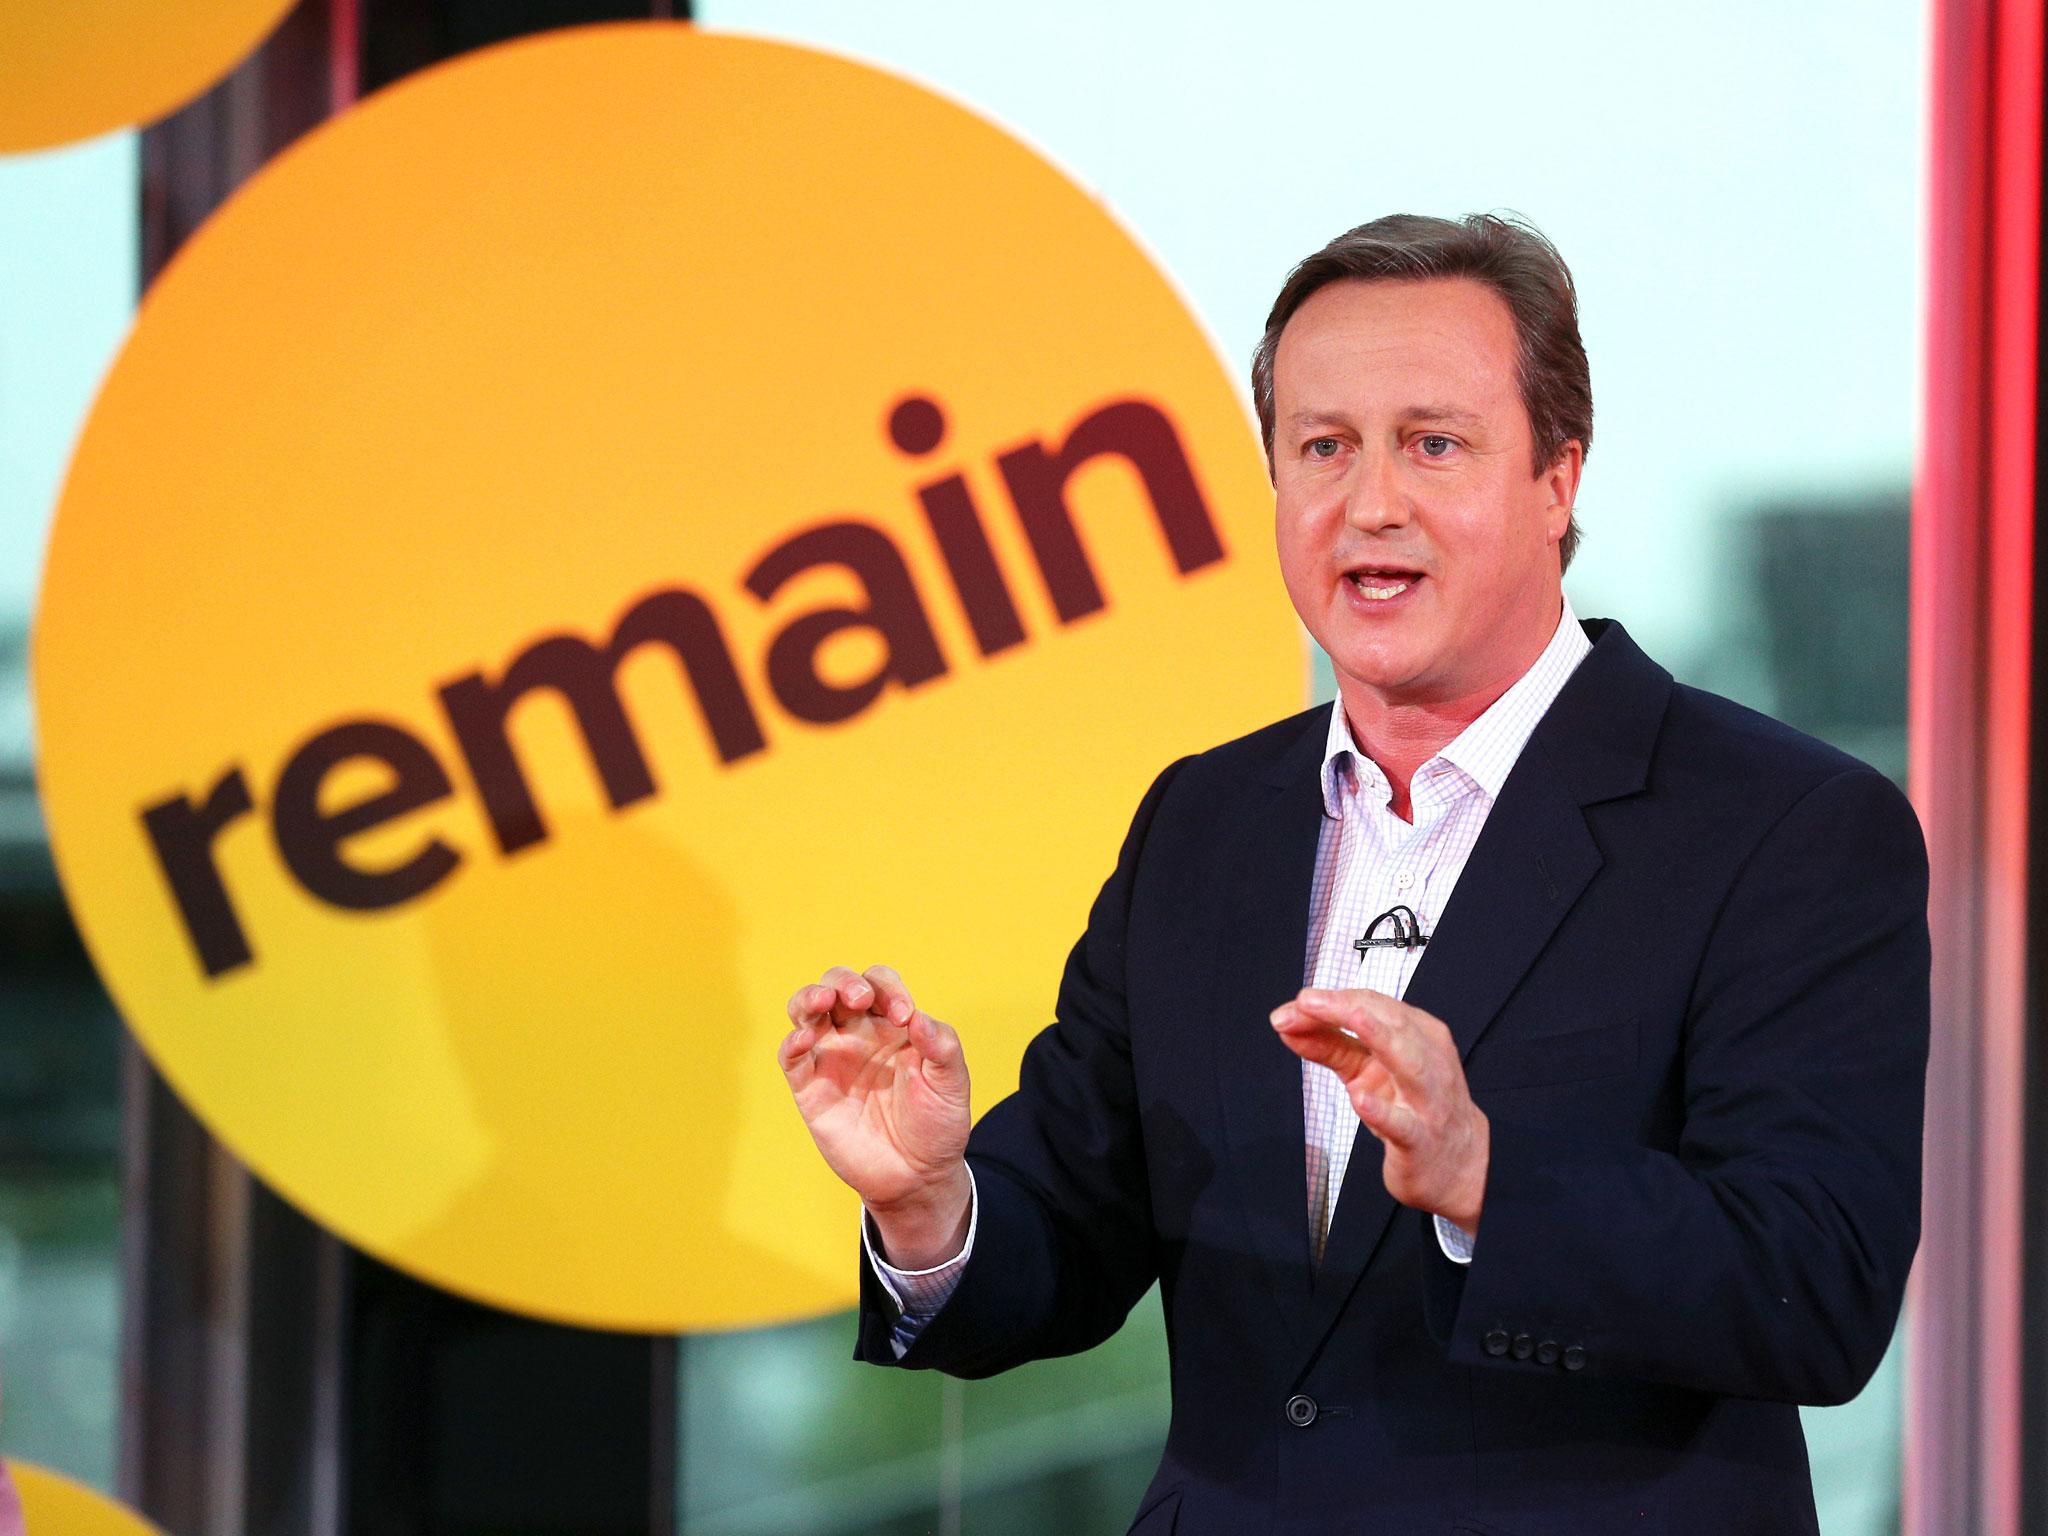 The latest polls will be a boost to David Cameron and the Remain campaign